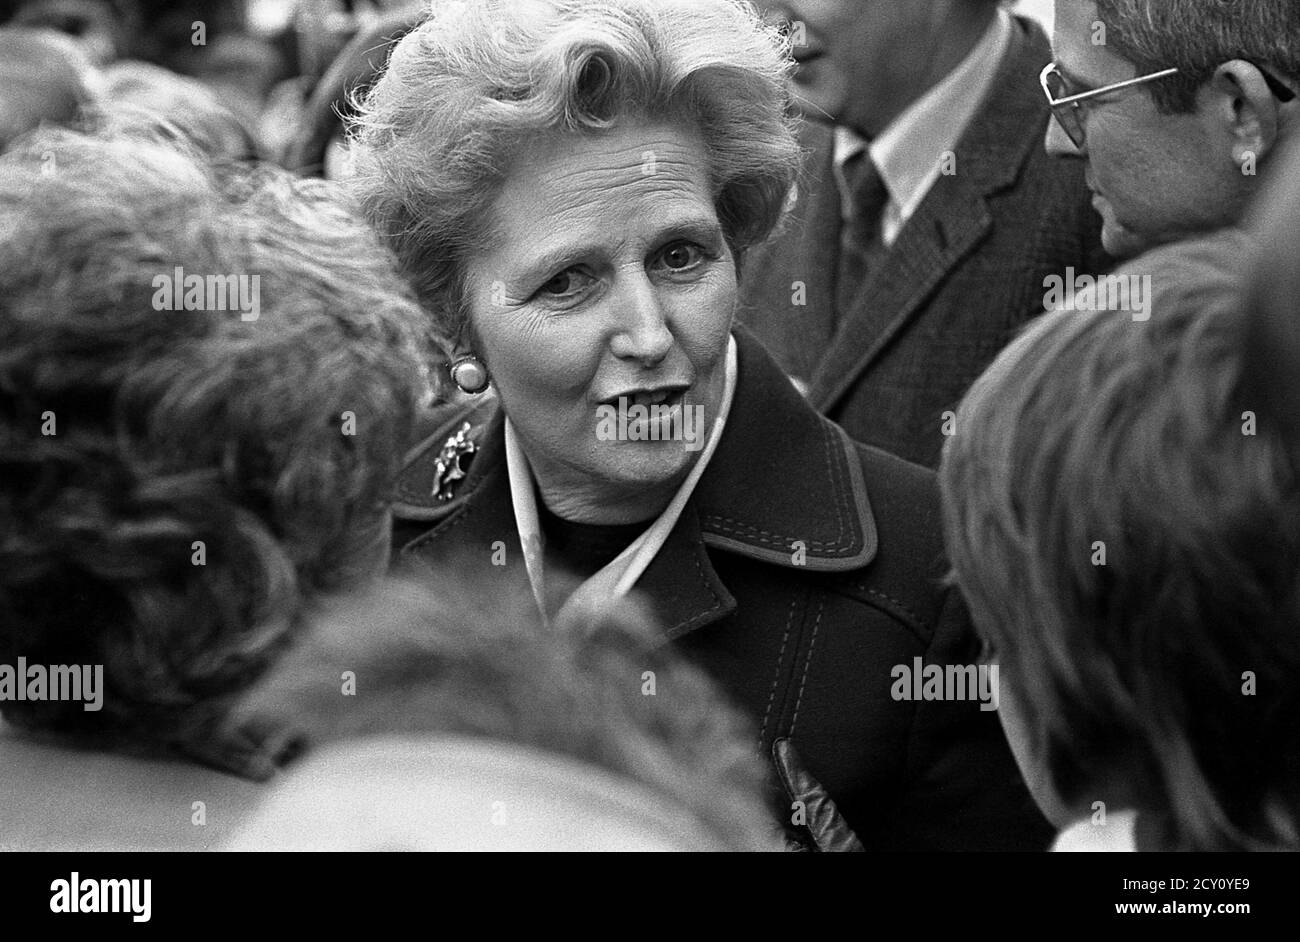 AJAXNETPHOTO.11TH FEBRUARY,1977. PORTSMOUTH, ENGLAND.  - CITY WALKABOUT - MRS MARGARET THATCHER (CON), LEADER OF THE OPPOSITION, ENGAGES WITH THE PUBLIC IN COMMERCIAL ROAD SHOPPING PRECINCT DURING A CAMPAIGN WALKABOUT. PHOTO:JONATHAN EASTLAND/AJAX REF:3771102 50 Stock Photo